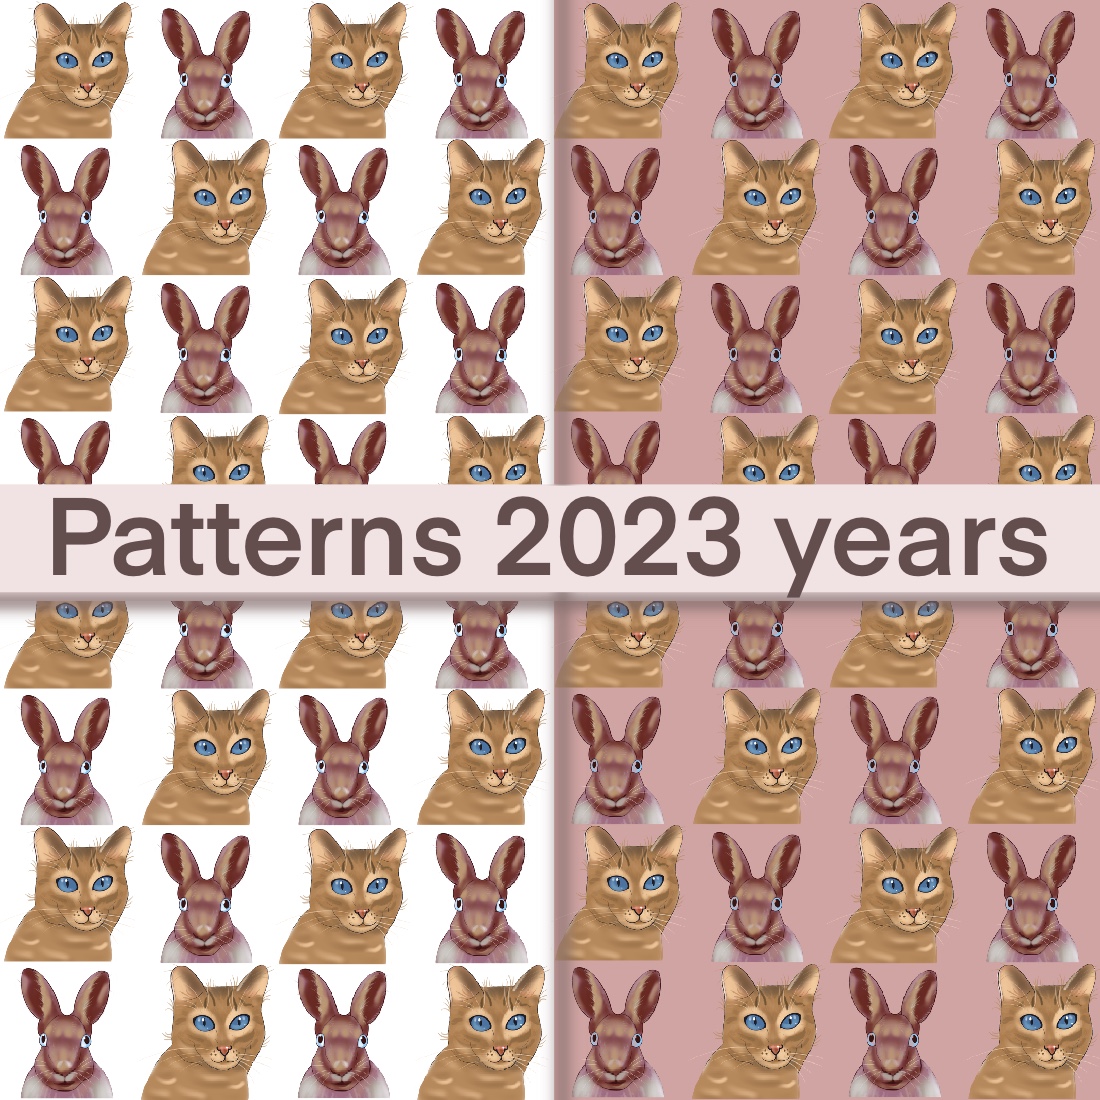 Cat and Rabbit Patterns Design cover image.